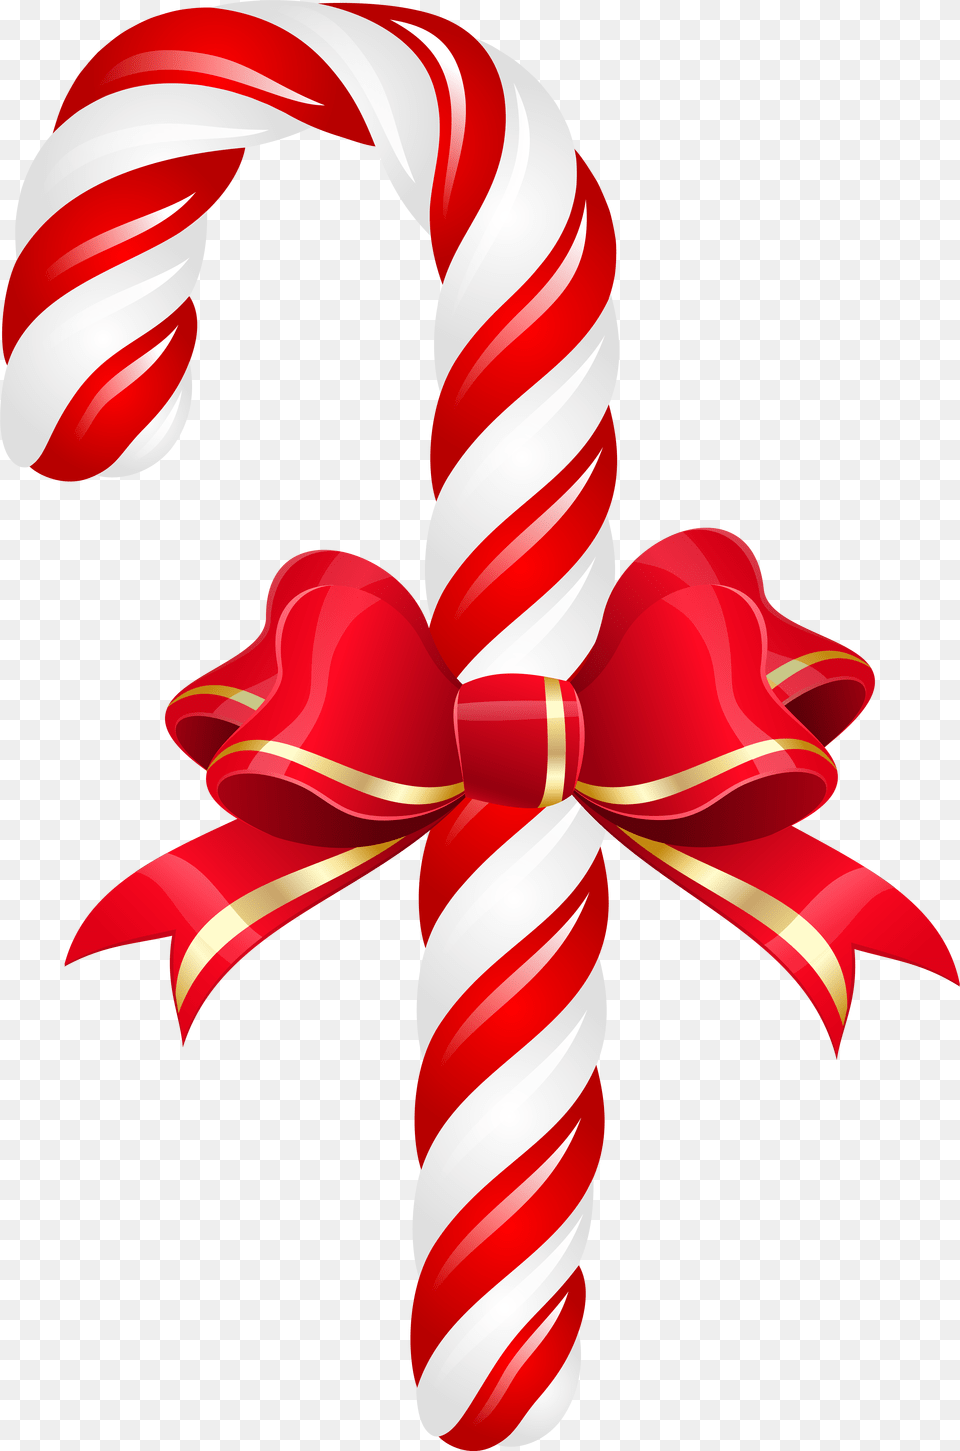 Clip Art Clip Art Image Gallery Candy Cane With Ribbon, Food, Sweets, Dynamite, Weapon Png